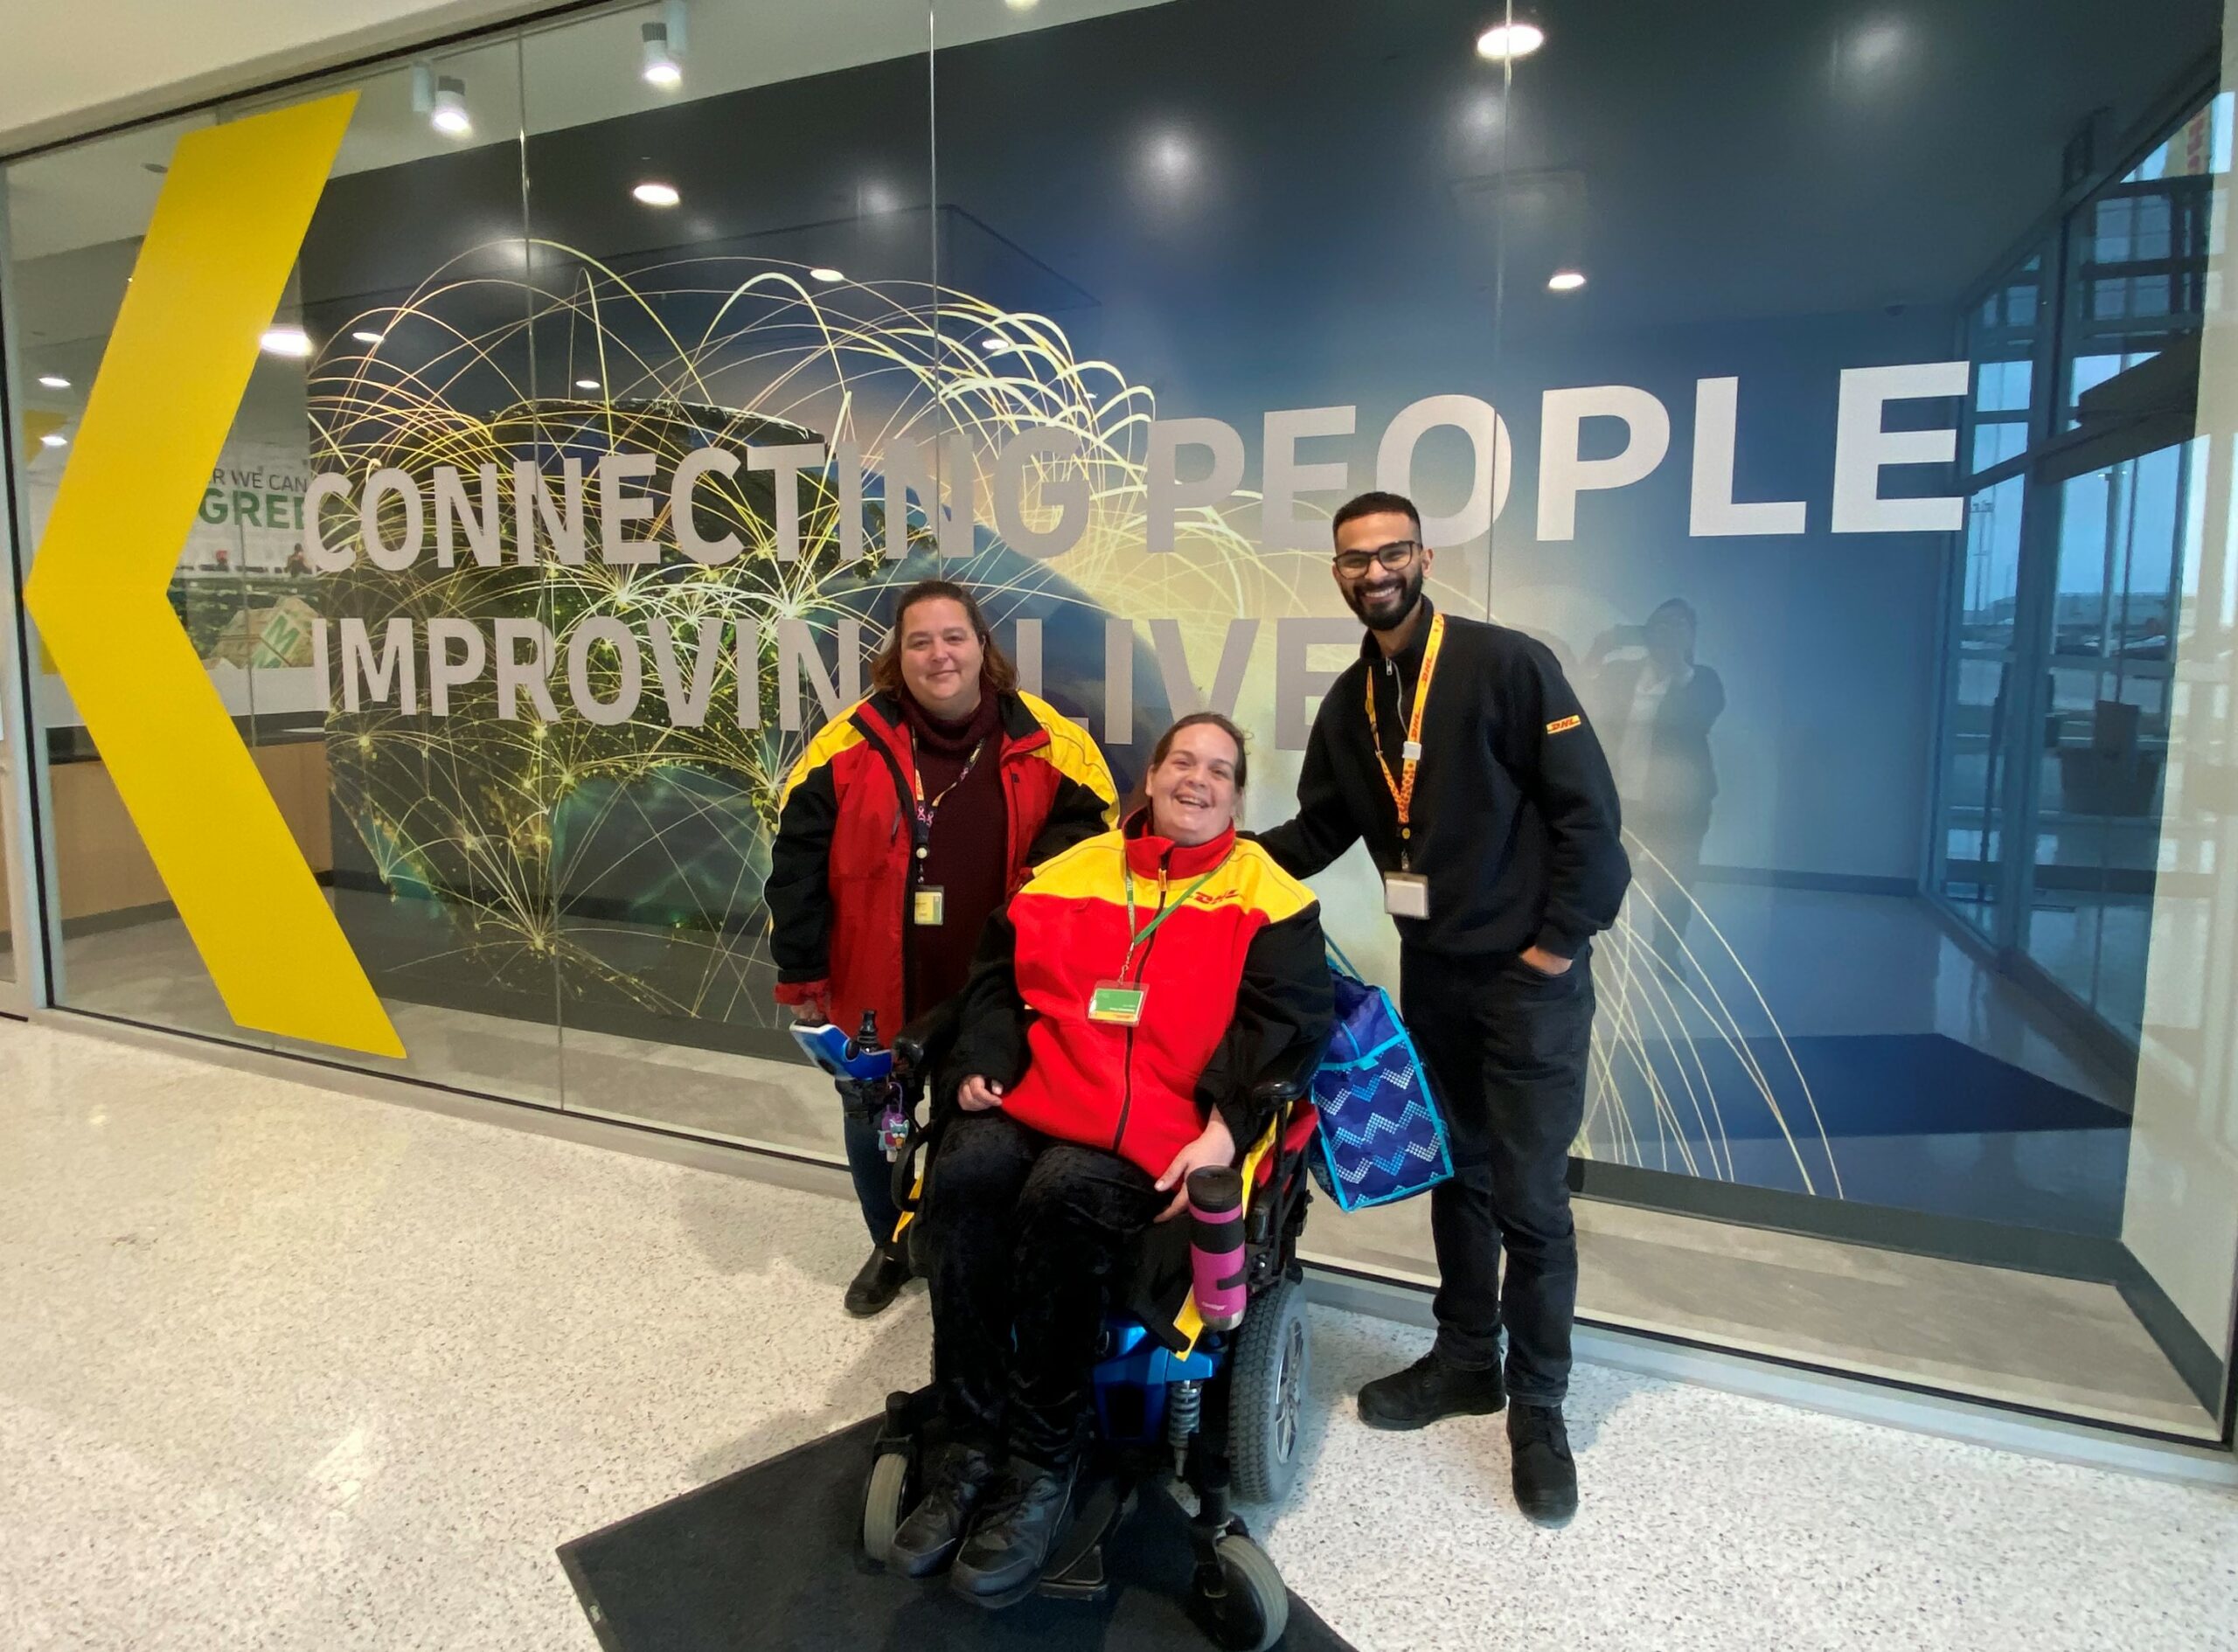 Leanne pictured in her DHL uniform alongside Ikram Muhammad and another colleague